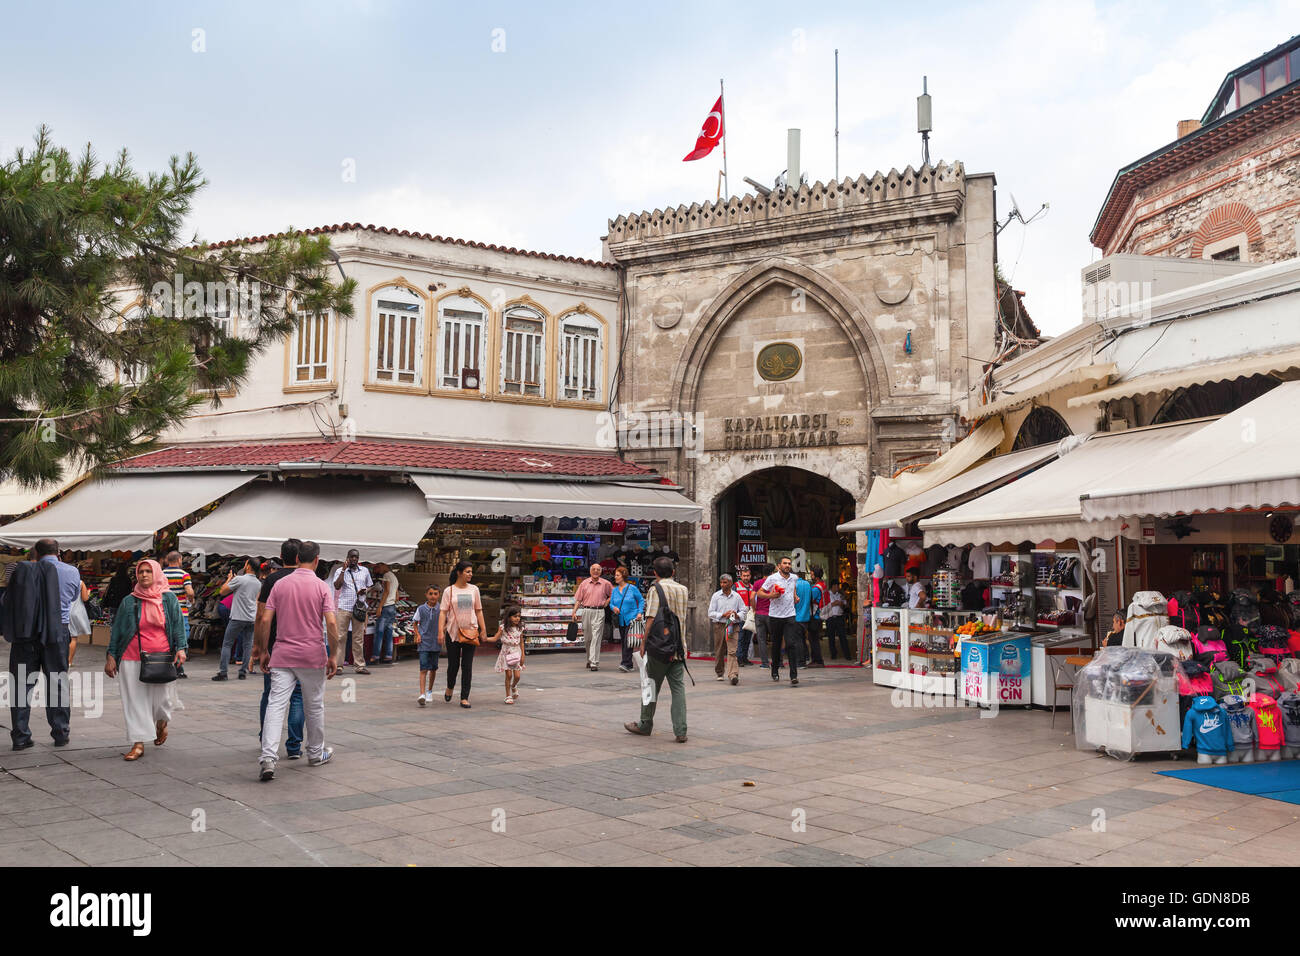 Istanbul, Turkey - June 28, 2016: Ordinary people walk on the street in old central district of Istanbul near Grand Bazaar entra Stock Photo